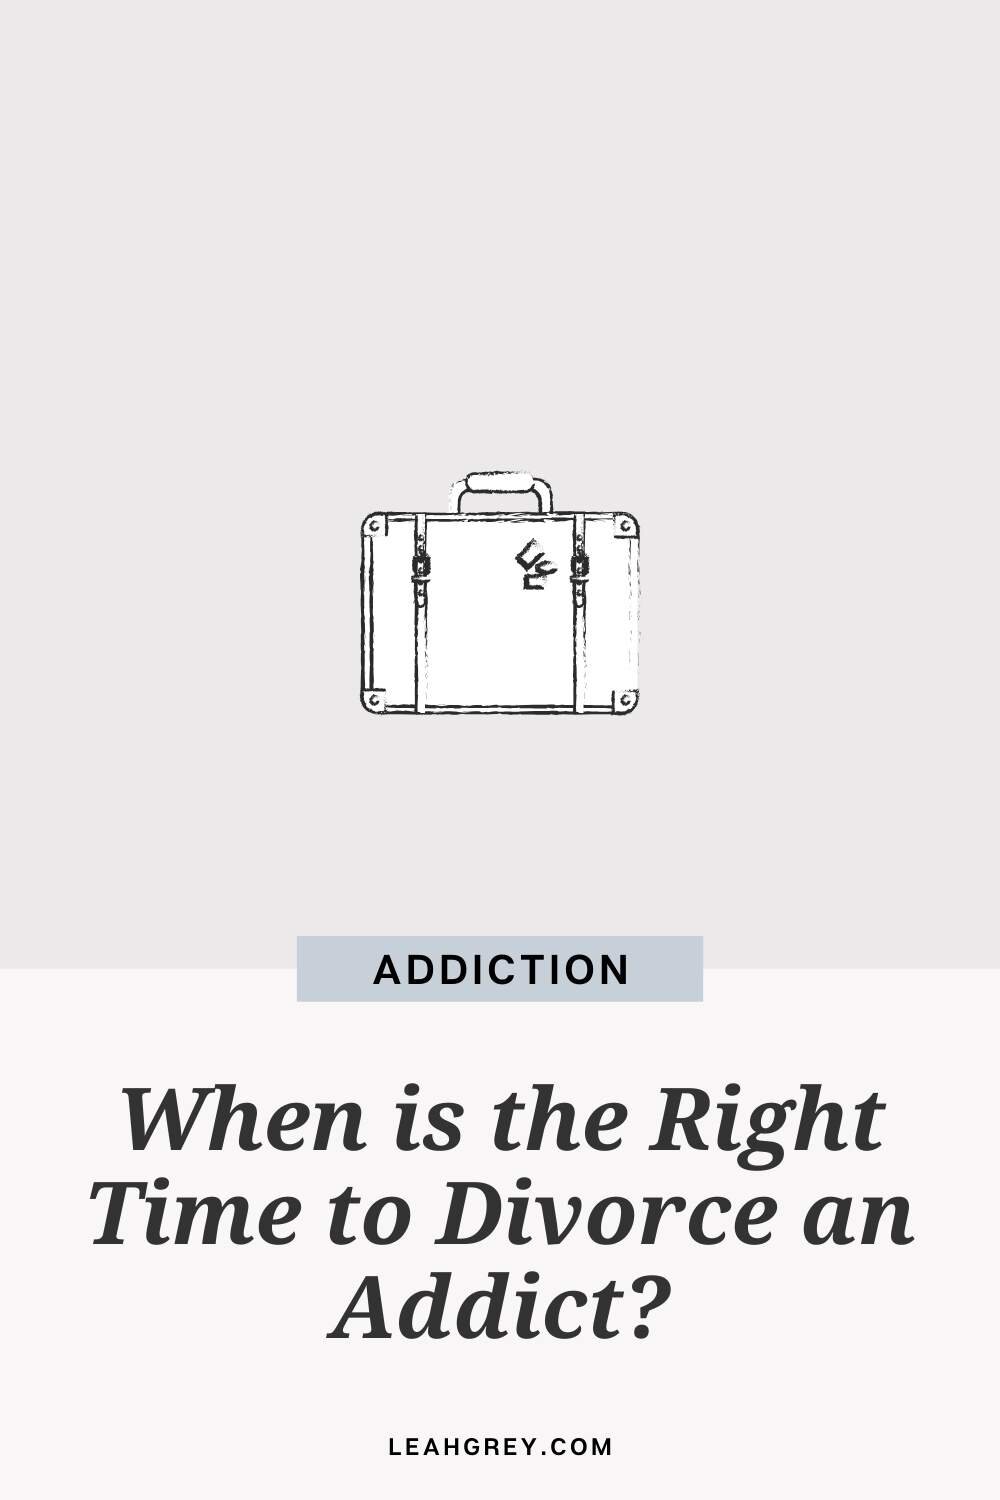 When is the Right Time to Divorce an Addict?